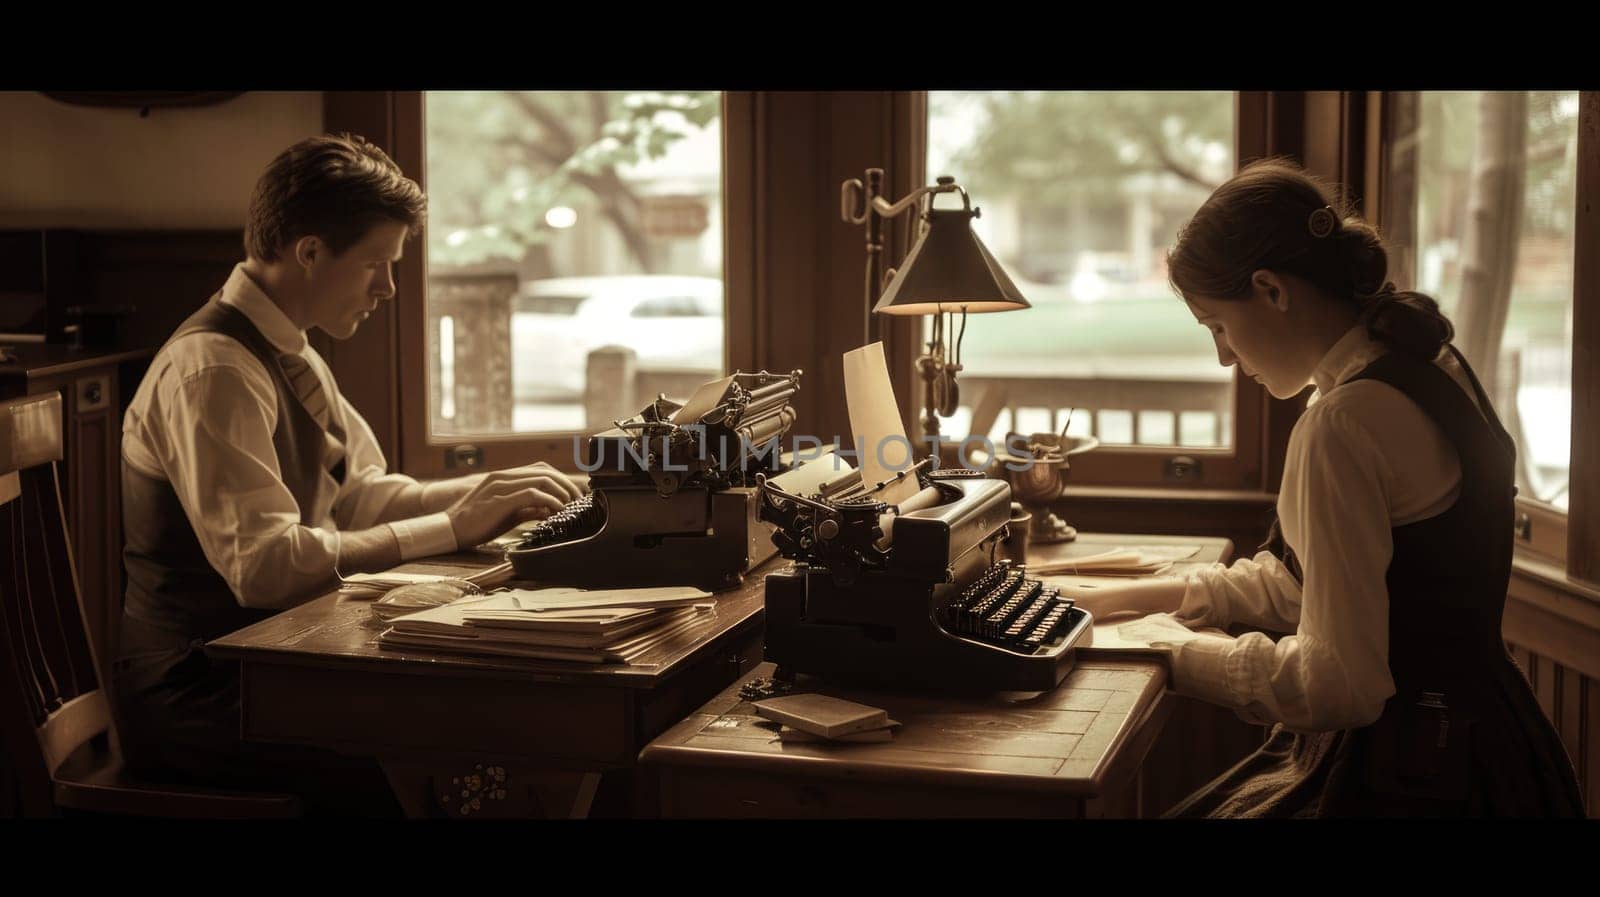 Two women seated at a table with a typewriter, sharing a conversation in a building with a window overlooking the street. AIG41